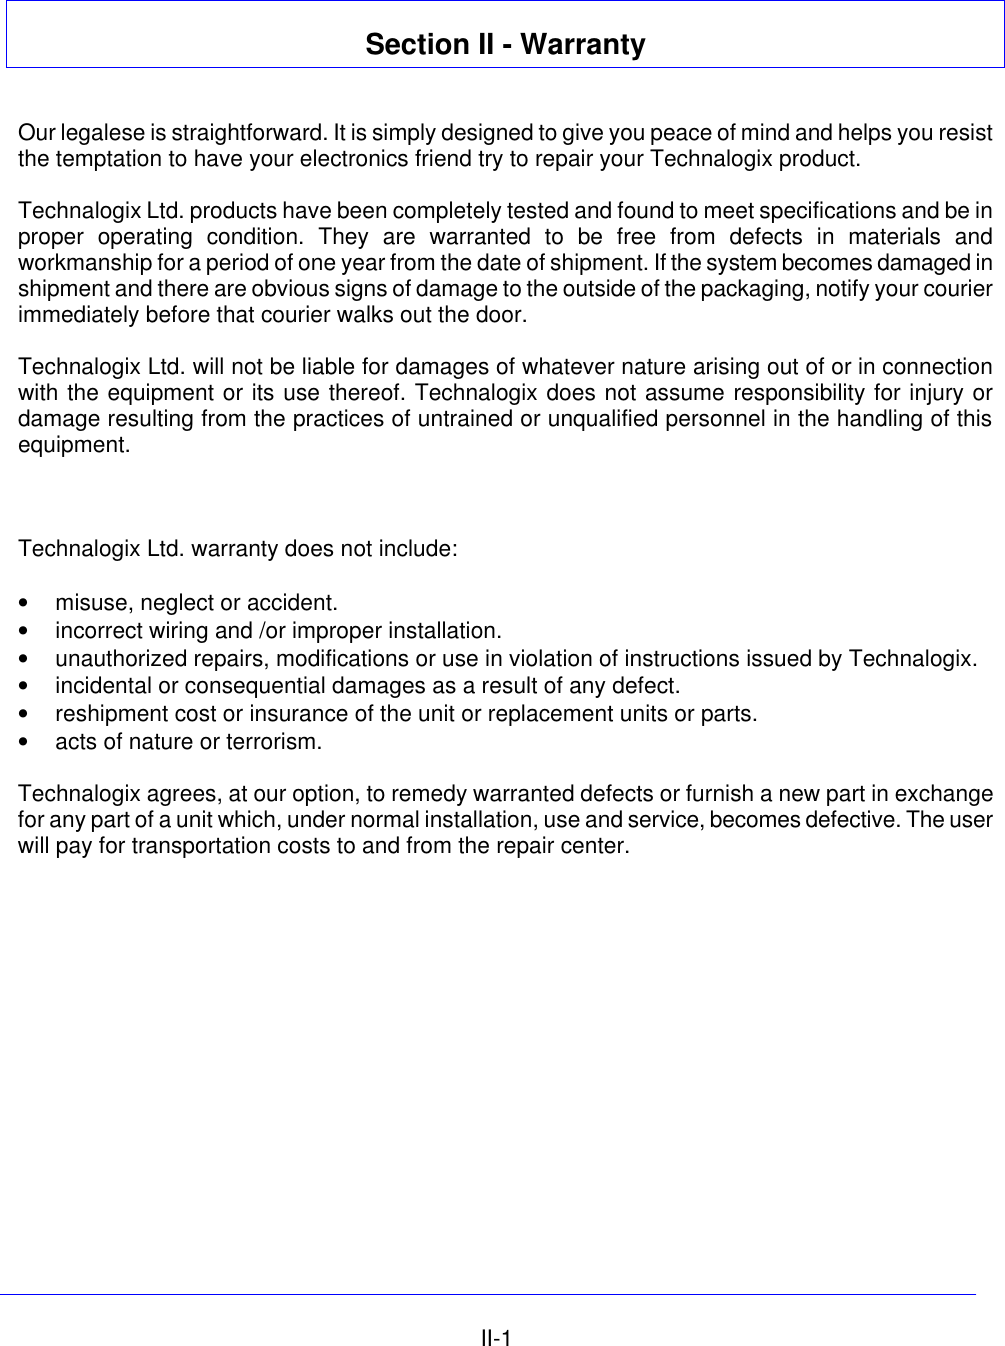   II-1 Section II - Warranty   Our legalese is straightforward. It is simply designed to give you peace of mind and helps you resist the temptation to have your electronics friend try to repair your Technalogix product.  Technalogix Ltd. products have been completely tested and found to meet specifications and be in proper operating condition. They are warranted to be free from defects in materials and workmanship for a period of one year from the date of shipment. If the system becomes damaged in shipment and there are obvious signs of damage to the outside of the packaging, notify your courier immediately before that courier walks out the door.  Technalogix Ltd. will not be liable for damages of whatever nature arising out of or in connection with the equipment or its use thereof. Technalogix does not assume responsibility for injury or damage resulting from the practices of untrained or unqualified personnel in the handling of this equipment.     Technalogix Ltd. warranty does not include:  • misuse, neglect or accident. • incorrect wiring and /or improper installation. • unauthorized repairs, modifications or use in violation of instructions issued by Technalogix. • incidental or consequential damages as a result of any defect. • reshipment cost or insurance of the unit or replacement units or parts. • acts of nature or terrorism.  Technalogix agrees, at our option, to remedy warranted defects or furnish a new part in exchange for any part of a unit which, under normal installation, use and service, becomes defective. The user will pay for transportation costs to and from the repair center.  